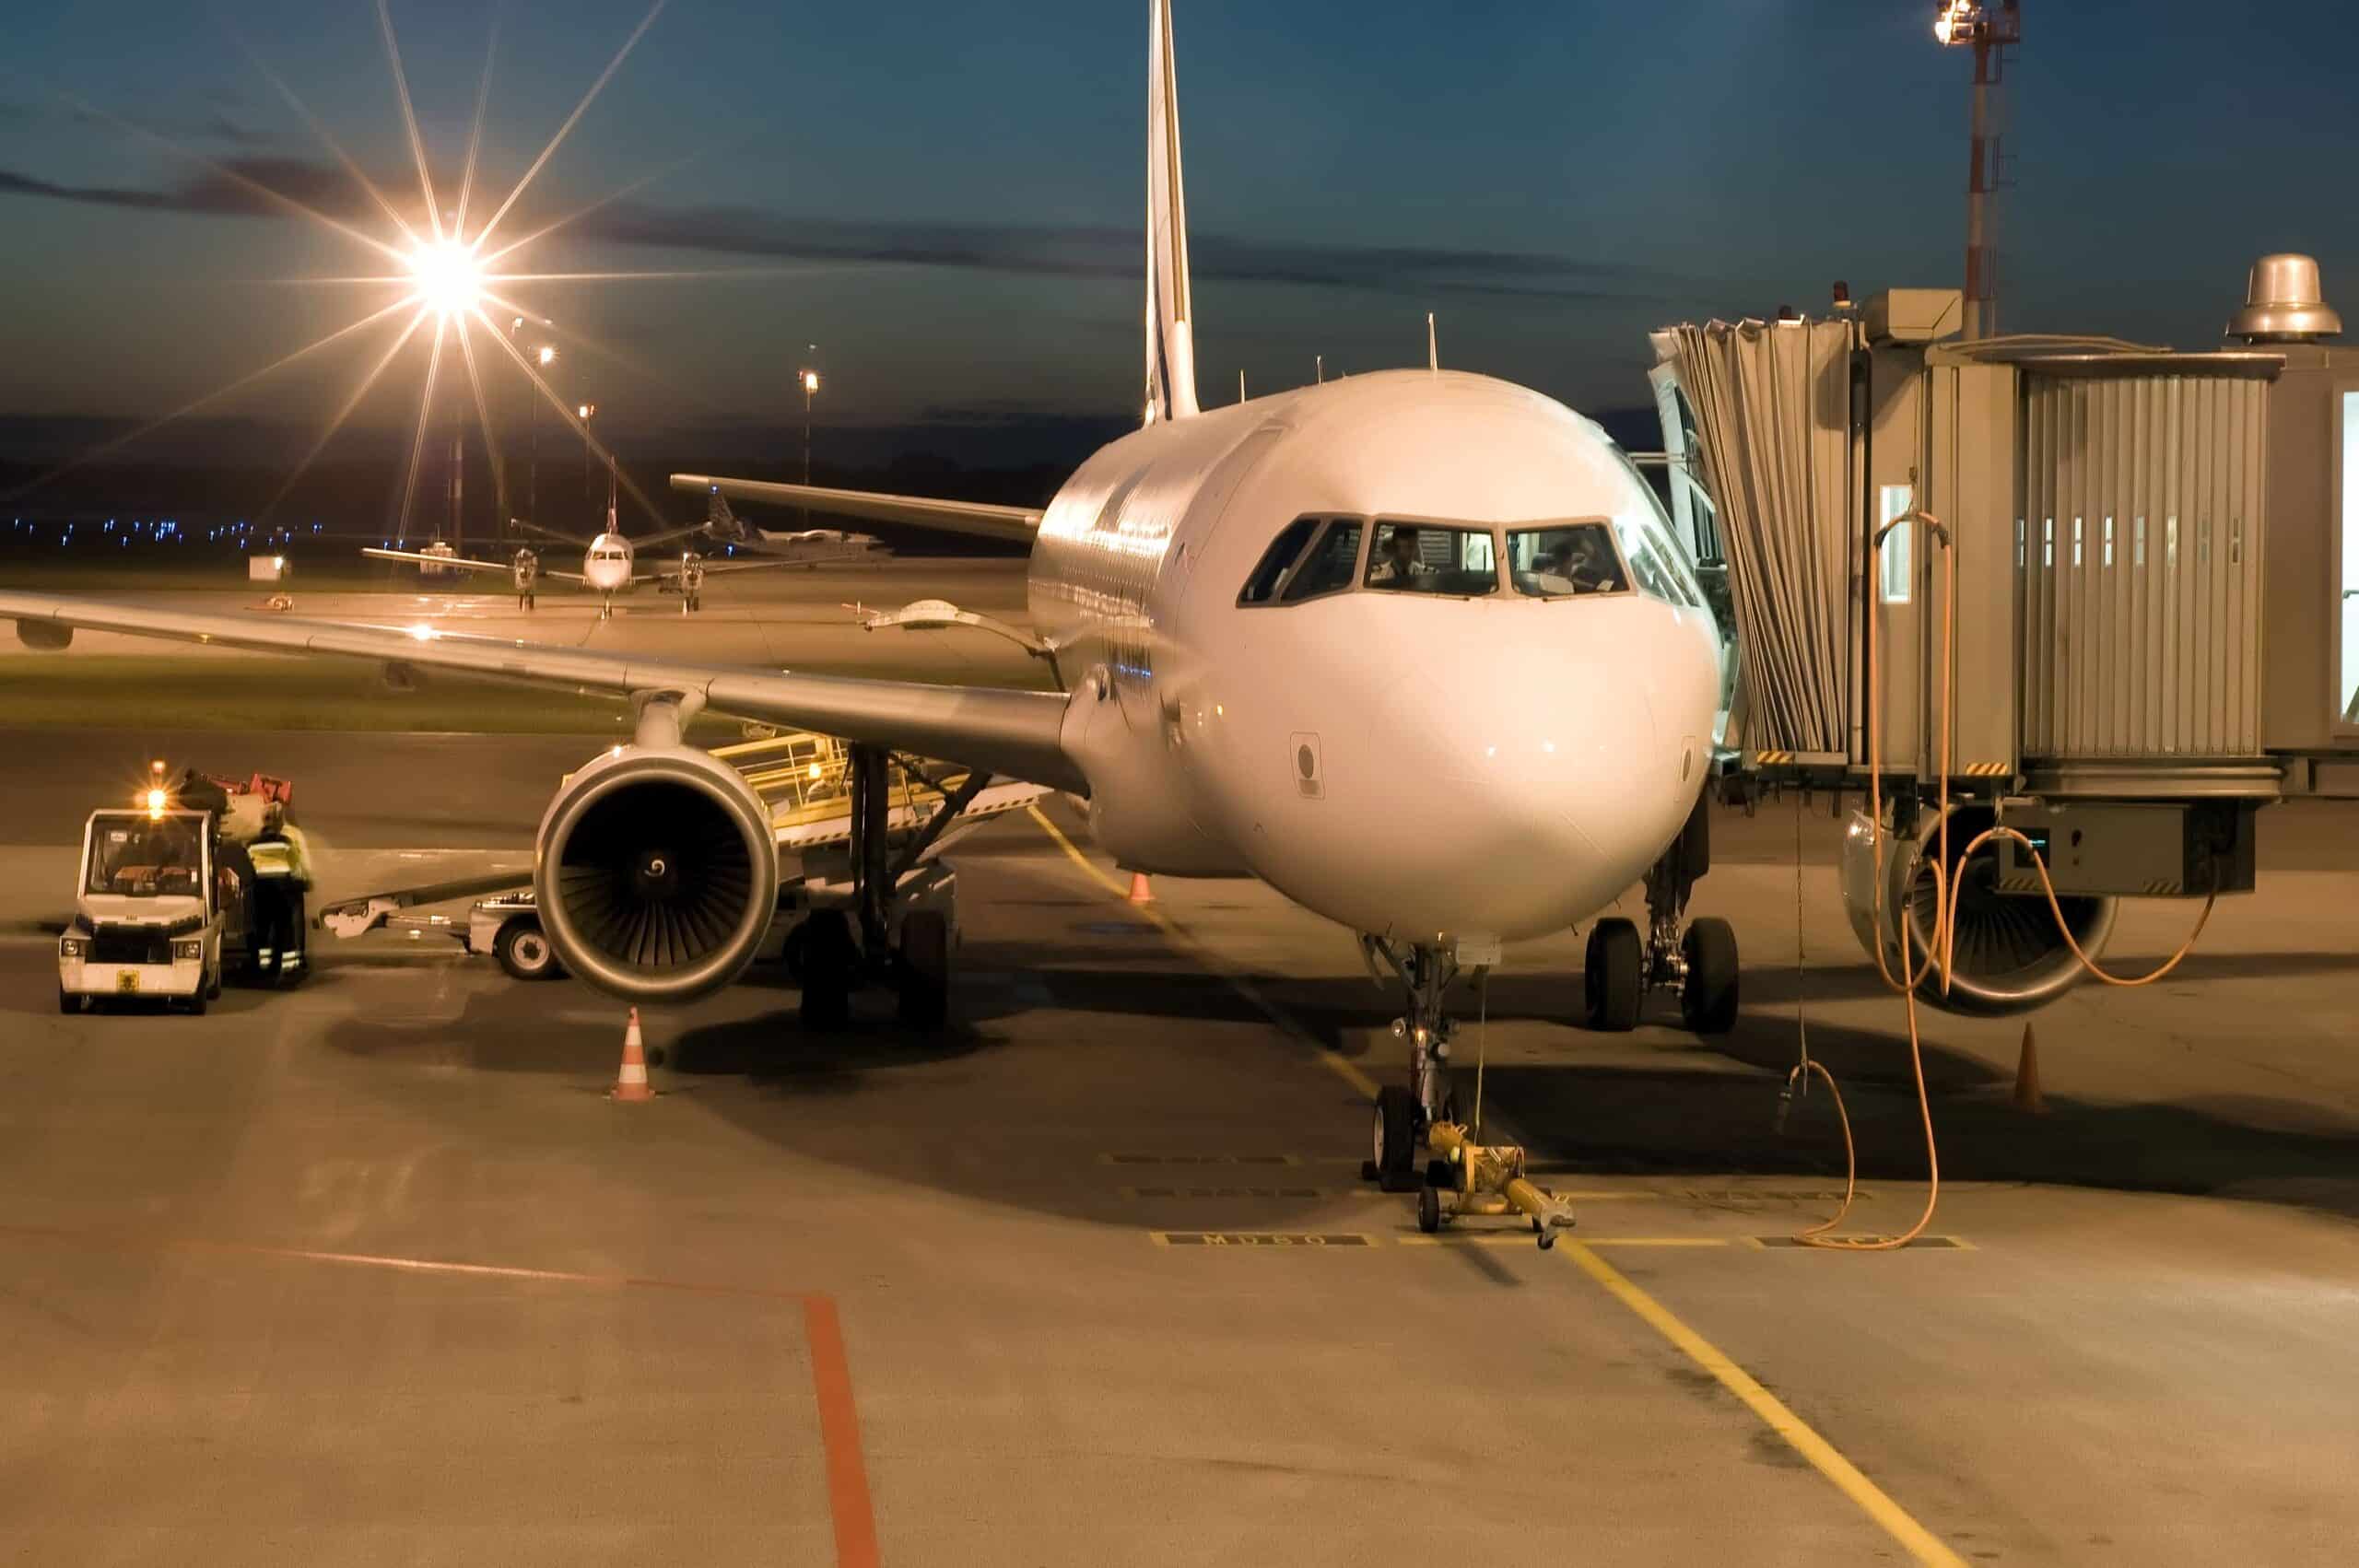 commercial airplane on apron at night connected to jet bridge